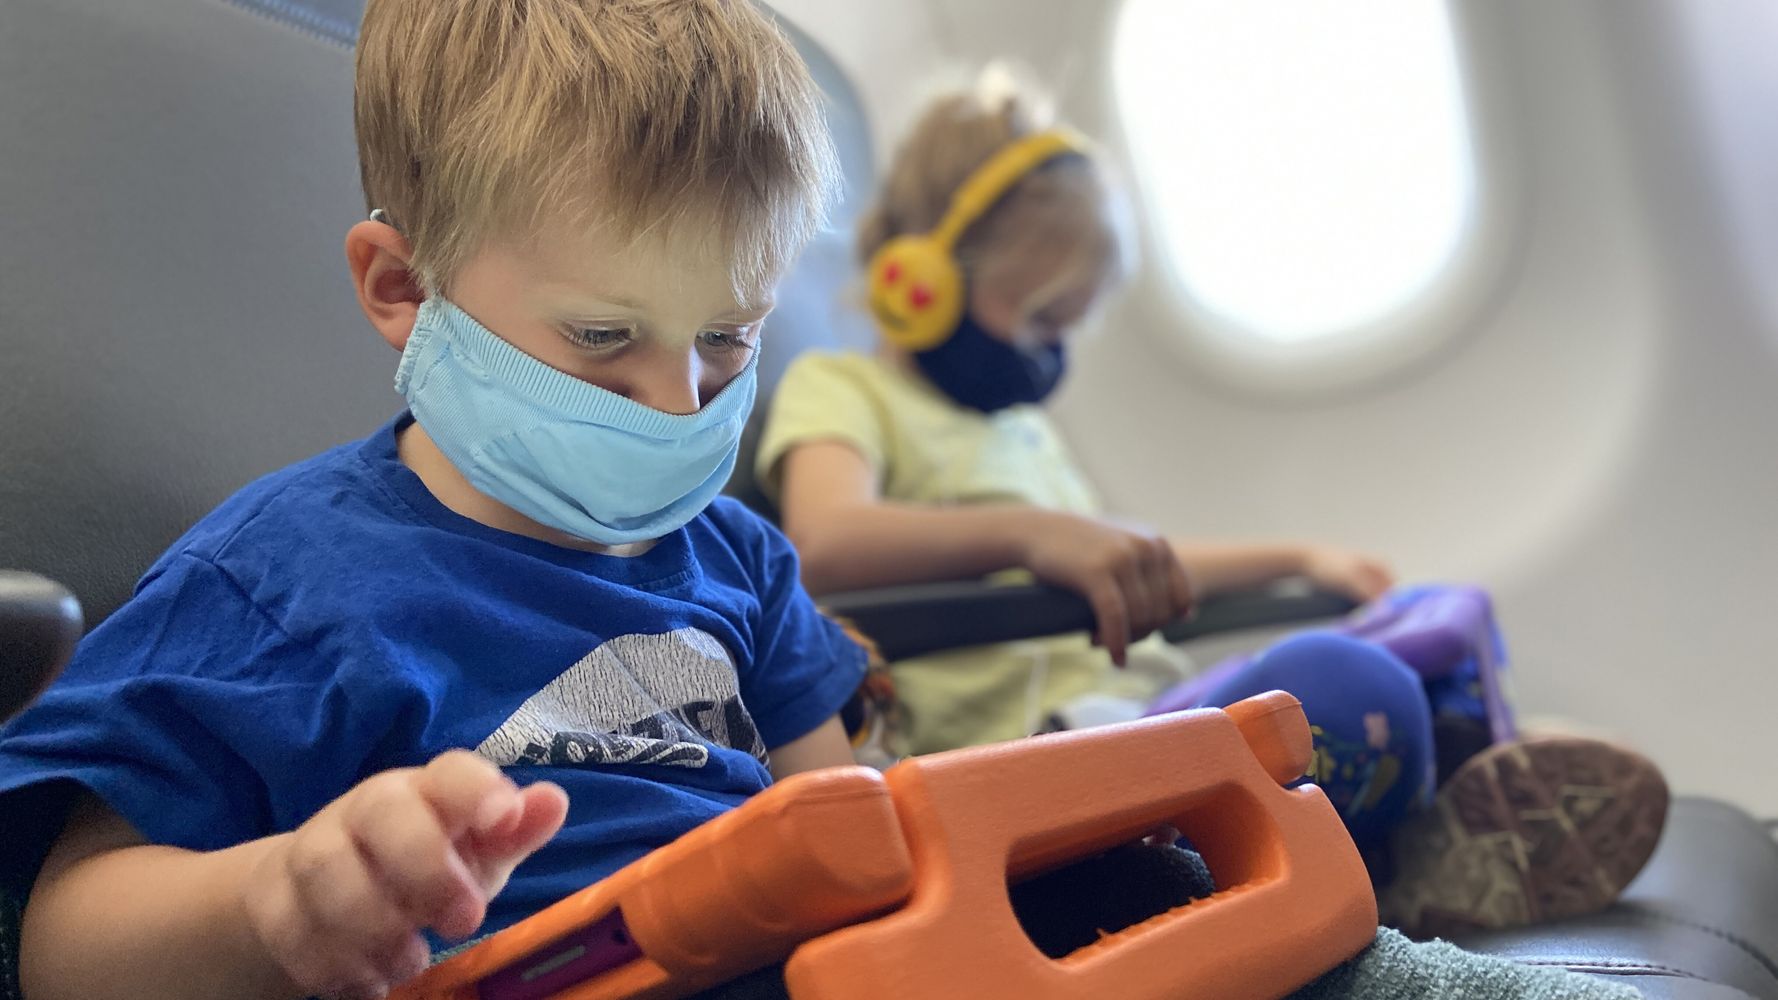 Airplane Hacks for Traveling with Kids Every Parent Needs